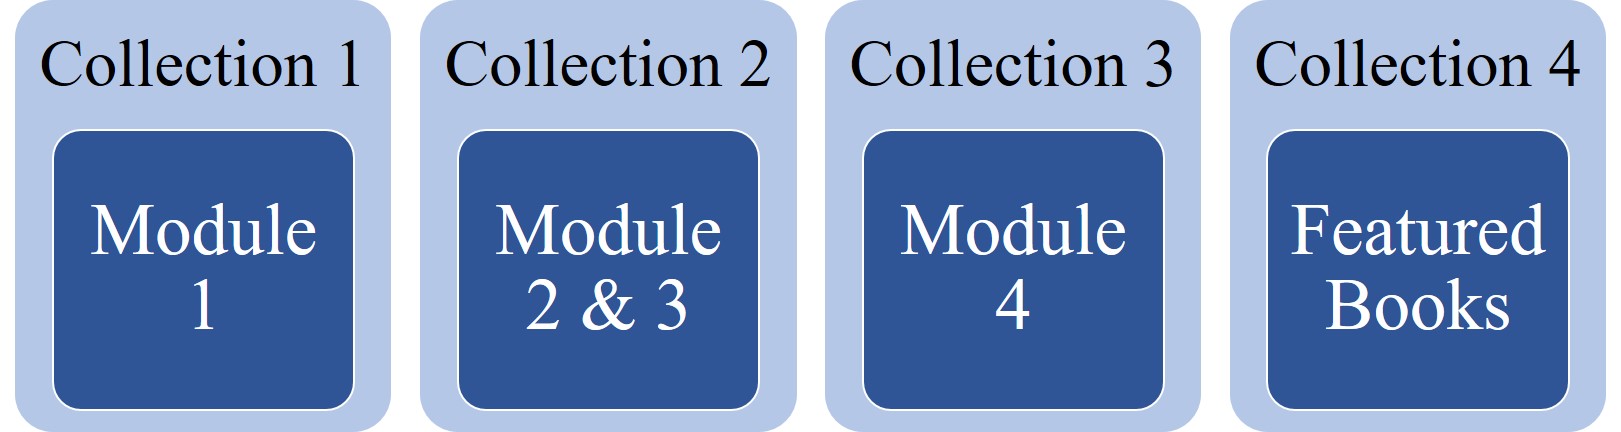 COLLECTIONS FOR WEBSITE